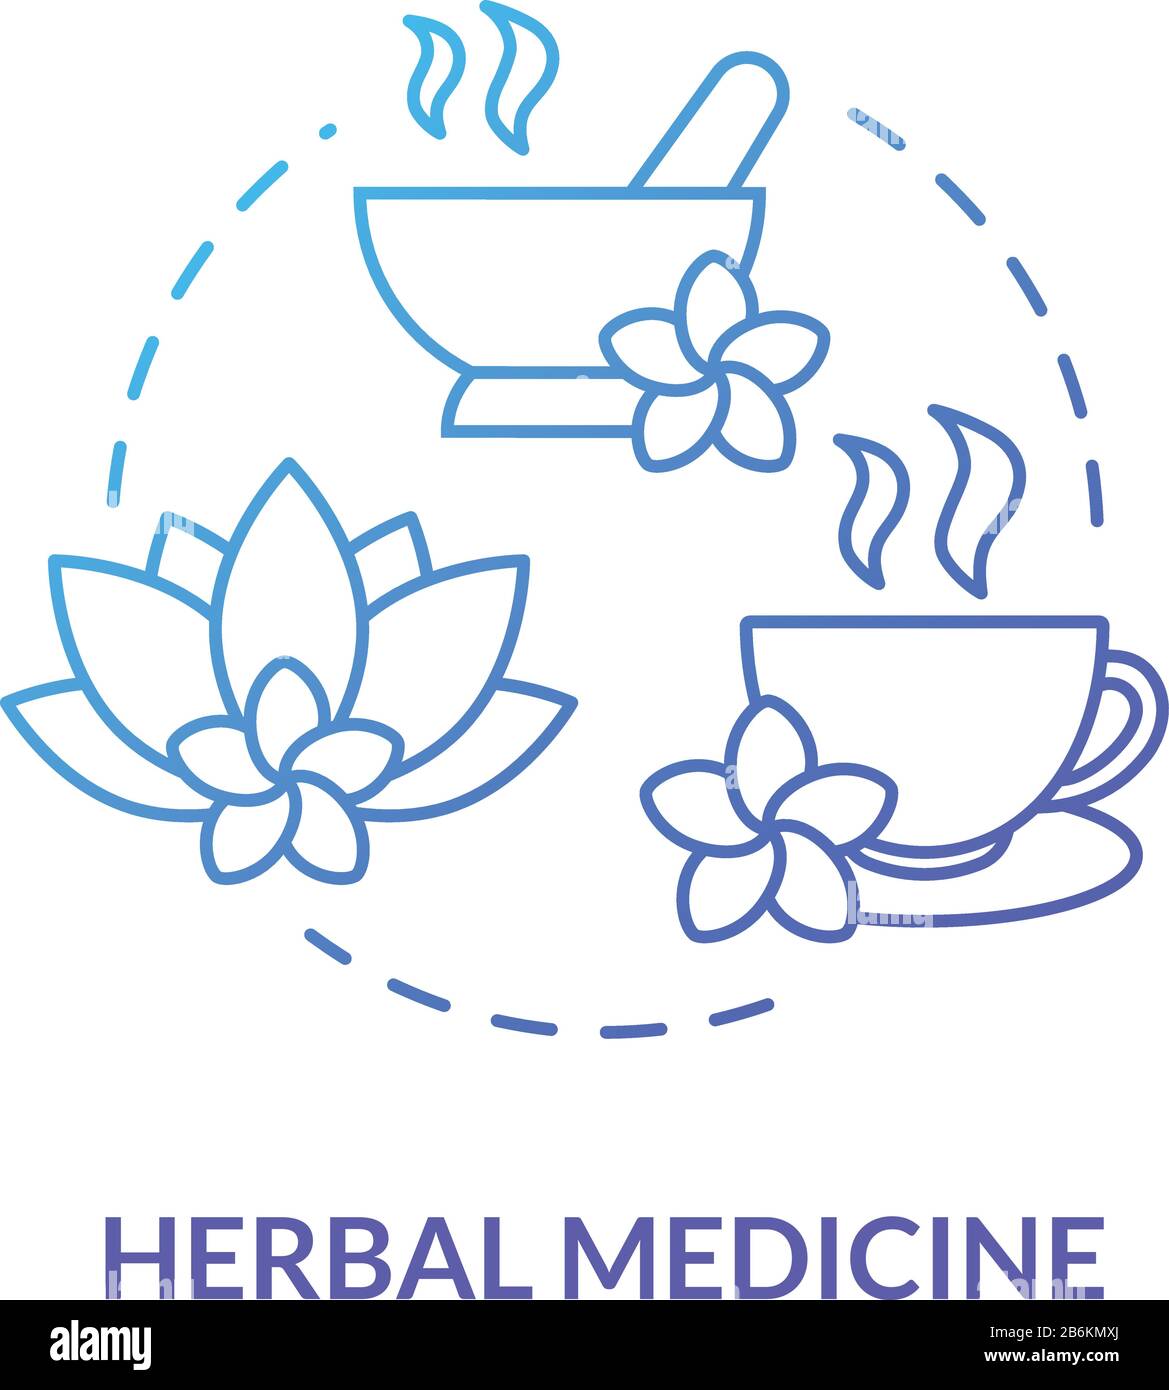 Herbal medicine concept icon. Alternative therapy, herbalism idea thin line illustration. Traditional treatment with medicinal plants, naturopathy Stock Vector